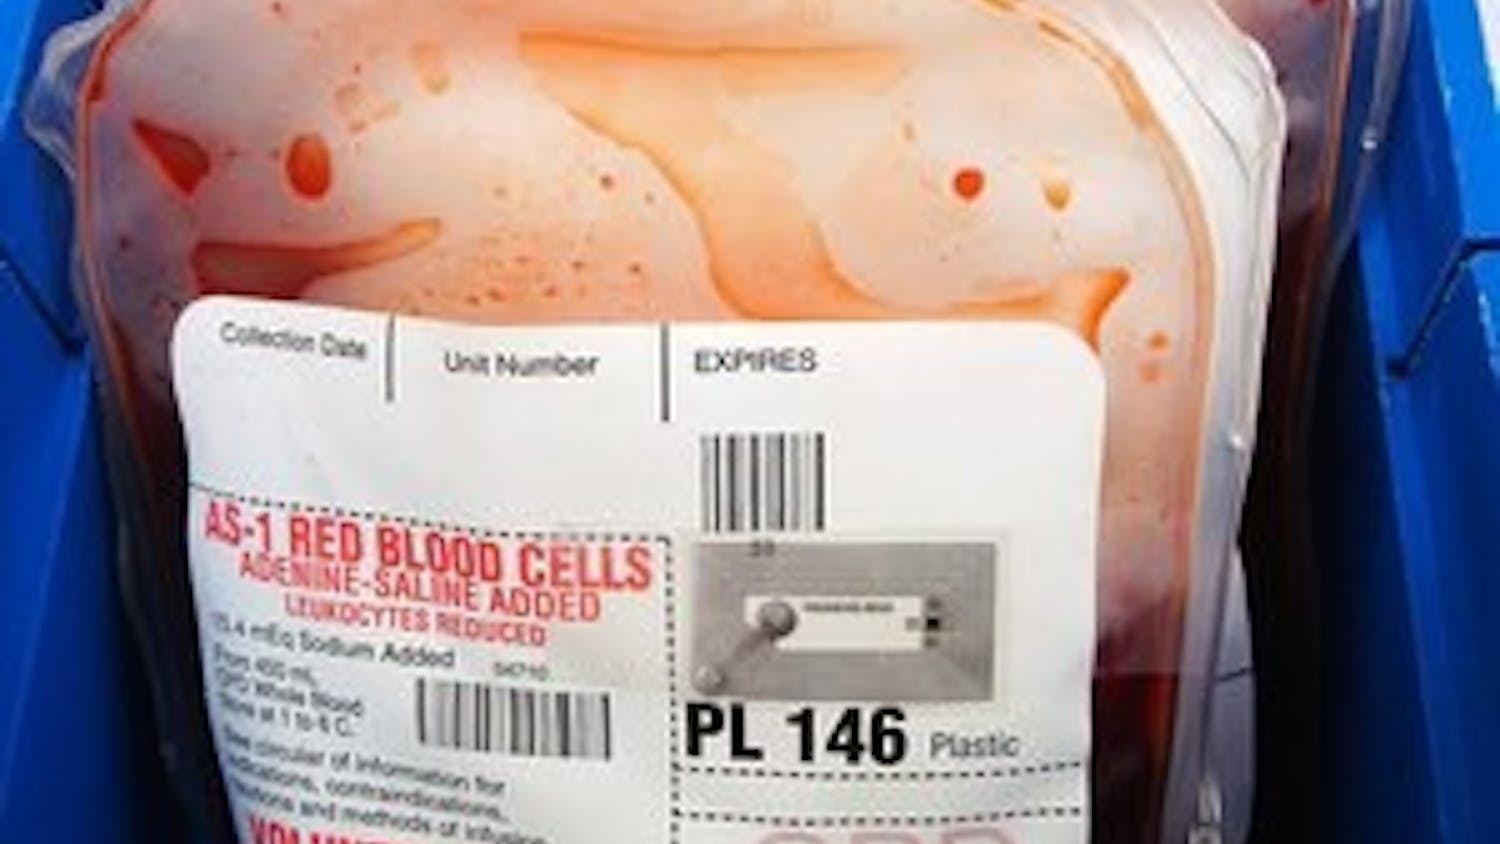 Tracking the nation's blood supply